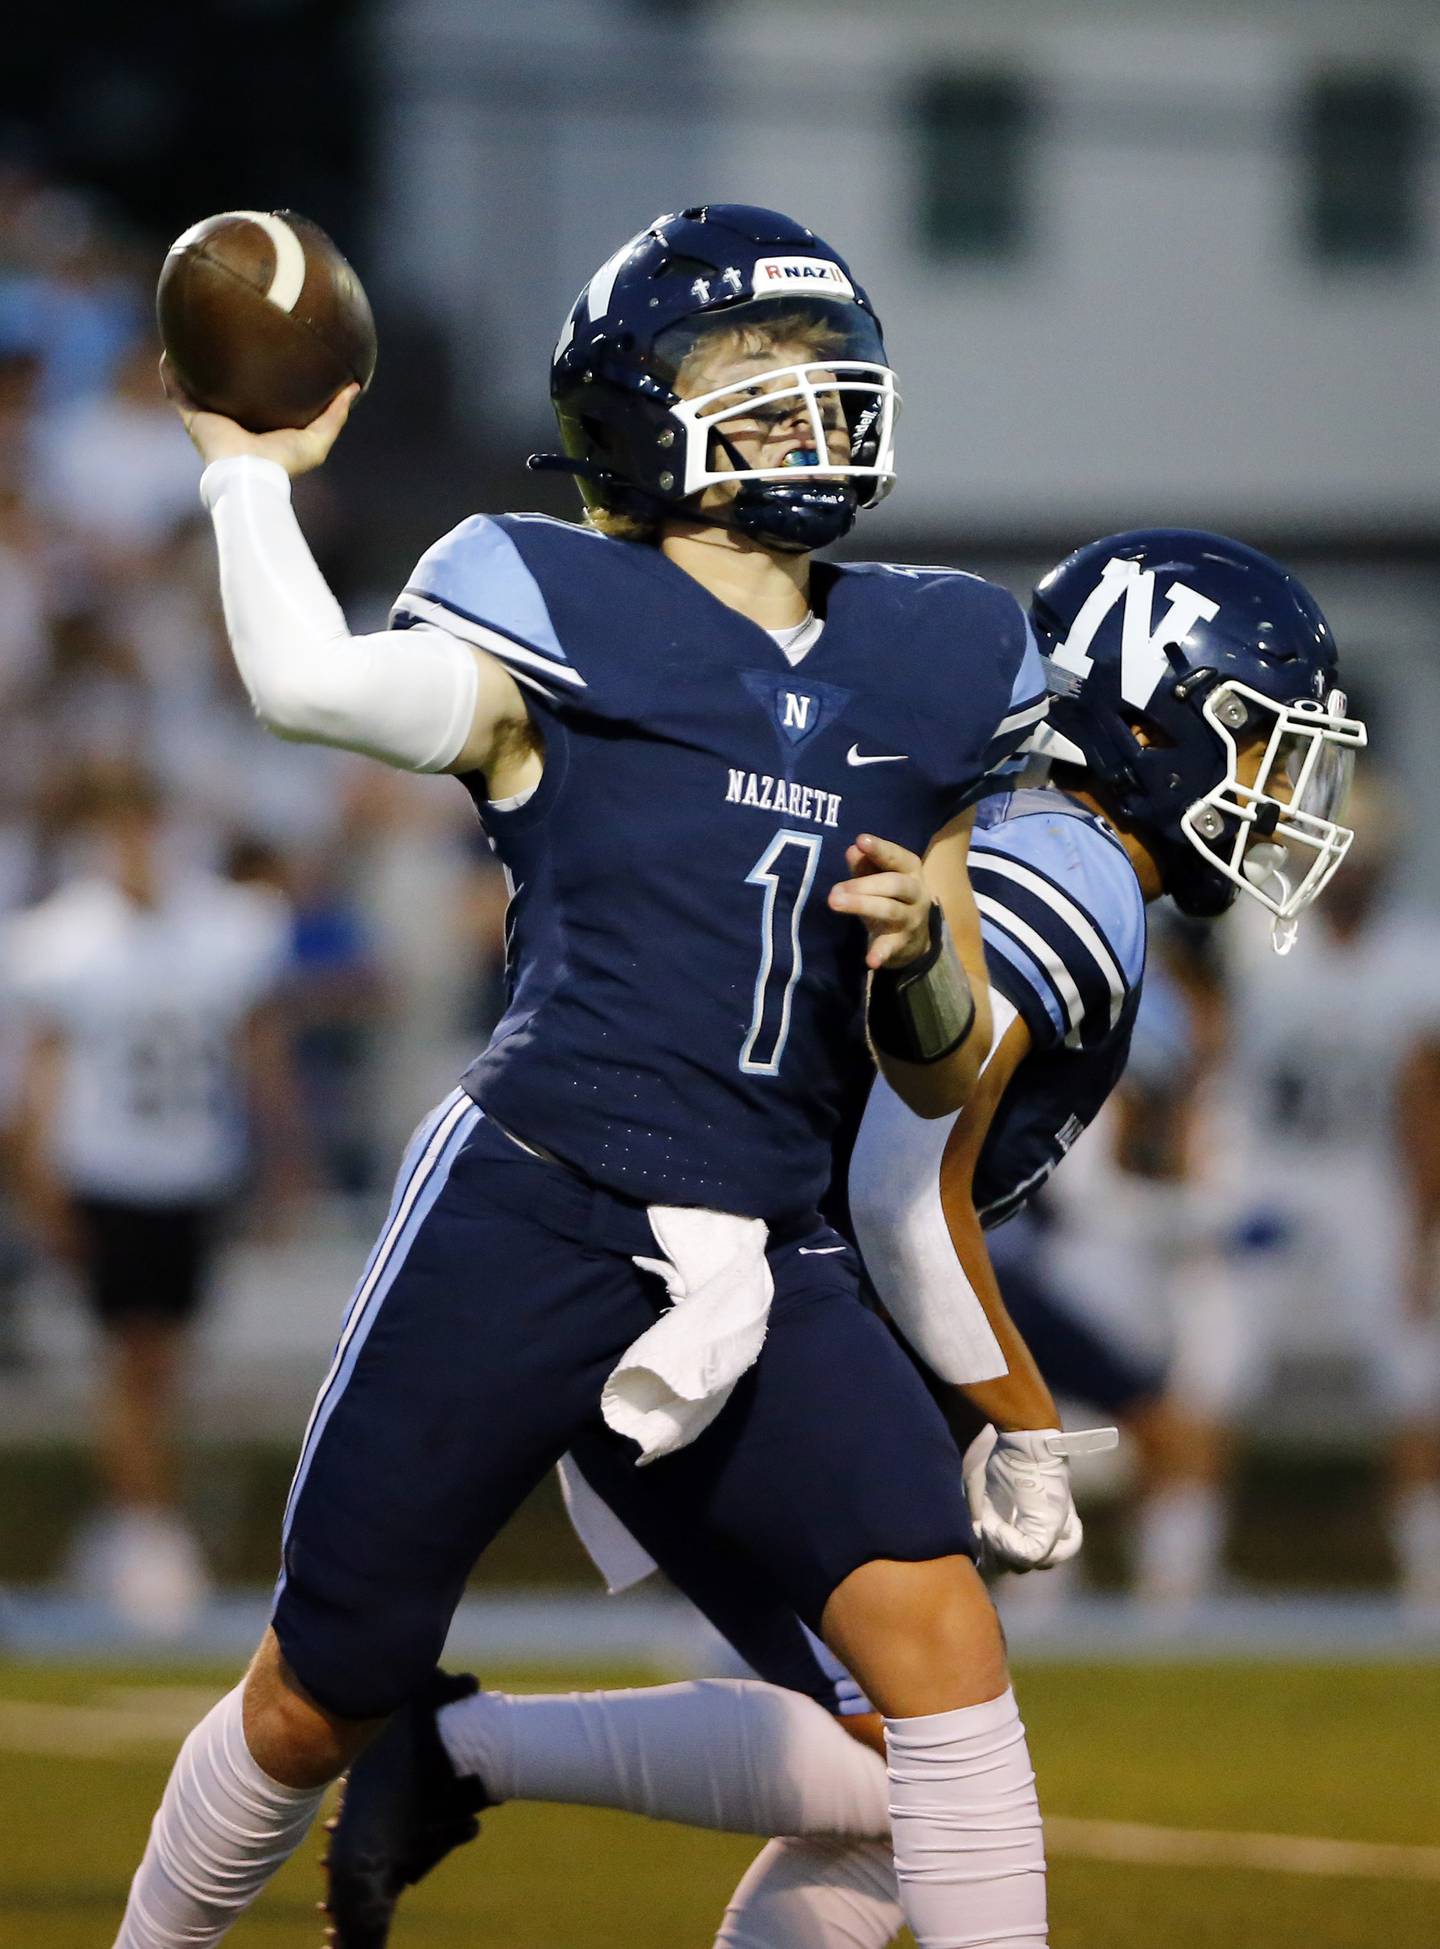 Nazareth Academy's Logan Malachuk (1) passes during the boys varsity football game between Lemont High School and Nazareth Academy on Friday, Sept. 2, 2022 in LaGrange, IL.